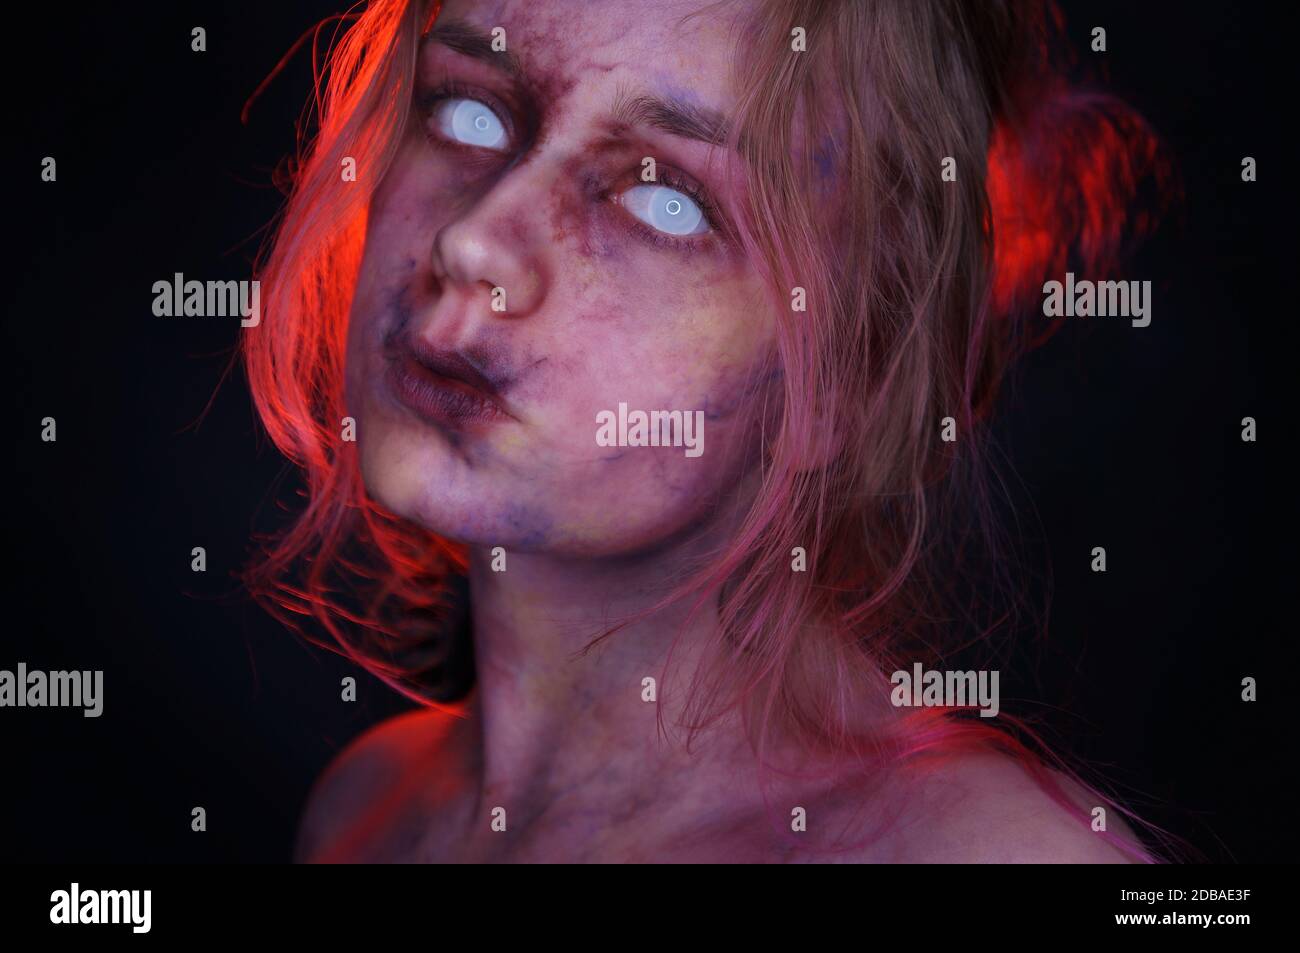 young woman with scary  sfx makeup Stock Photo